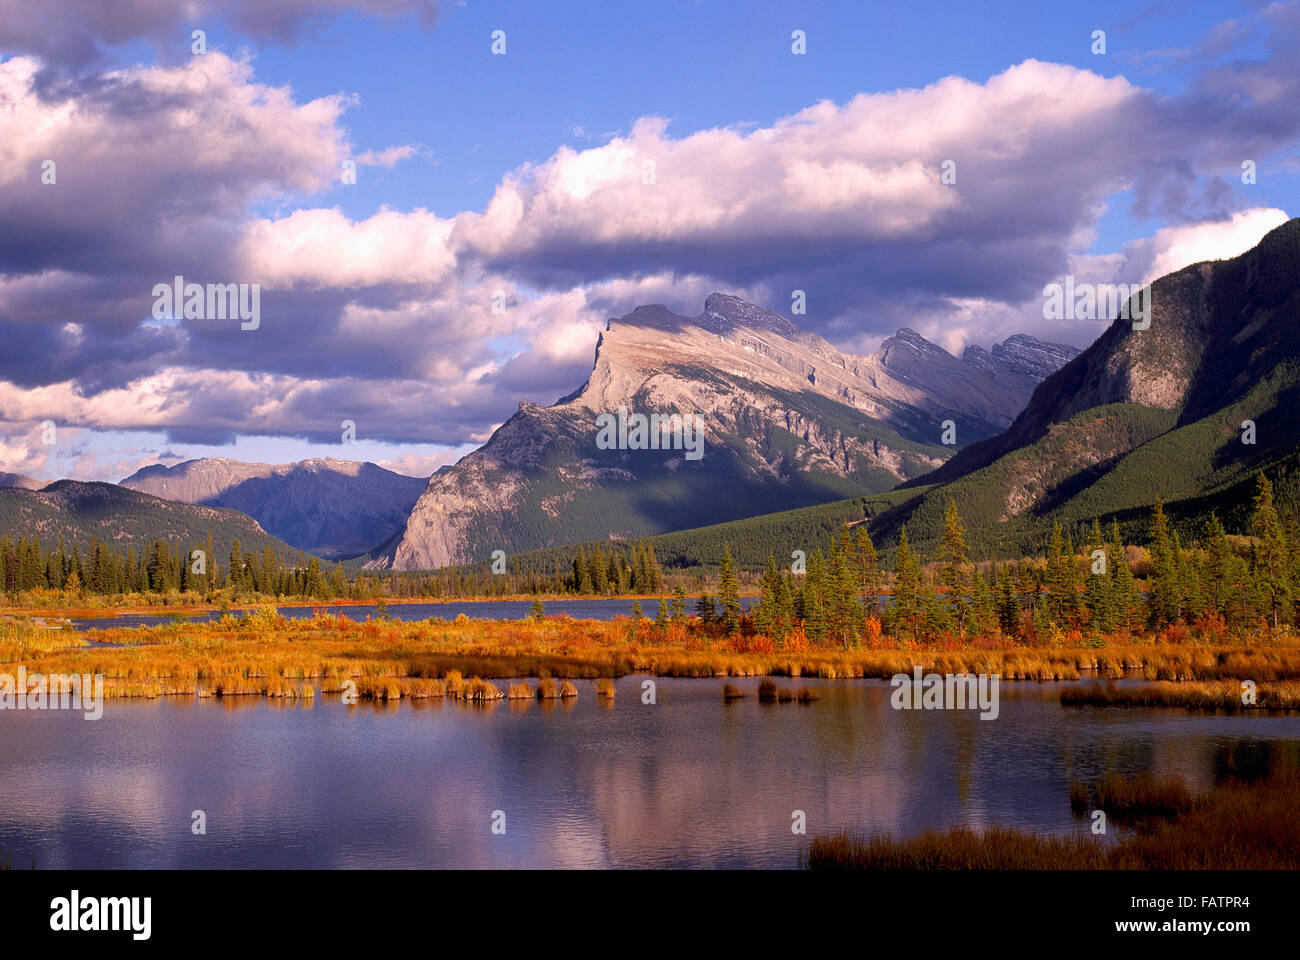 Mount Rundle and Vermilion Lakes/ Vermillion Lakes, Banff National Park, Alberta, Canada - Canadian Rockies, Autumn / Fall Stock Photo